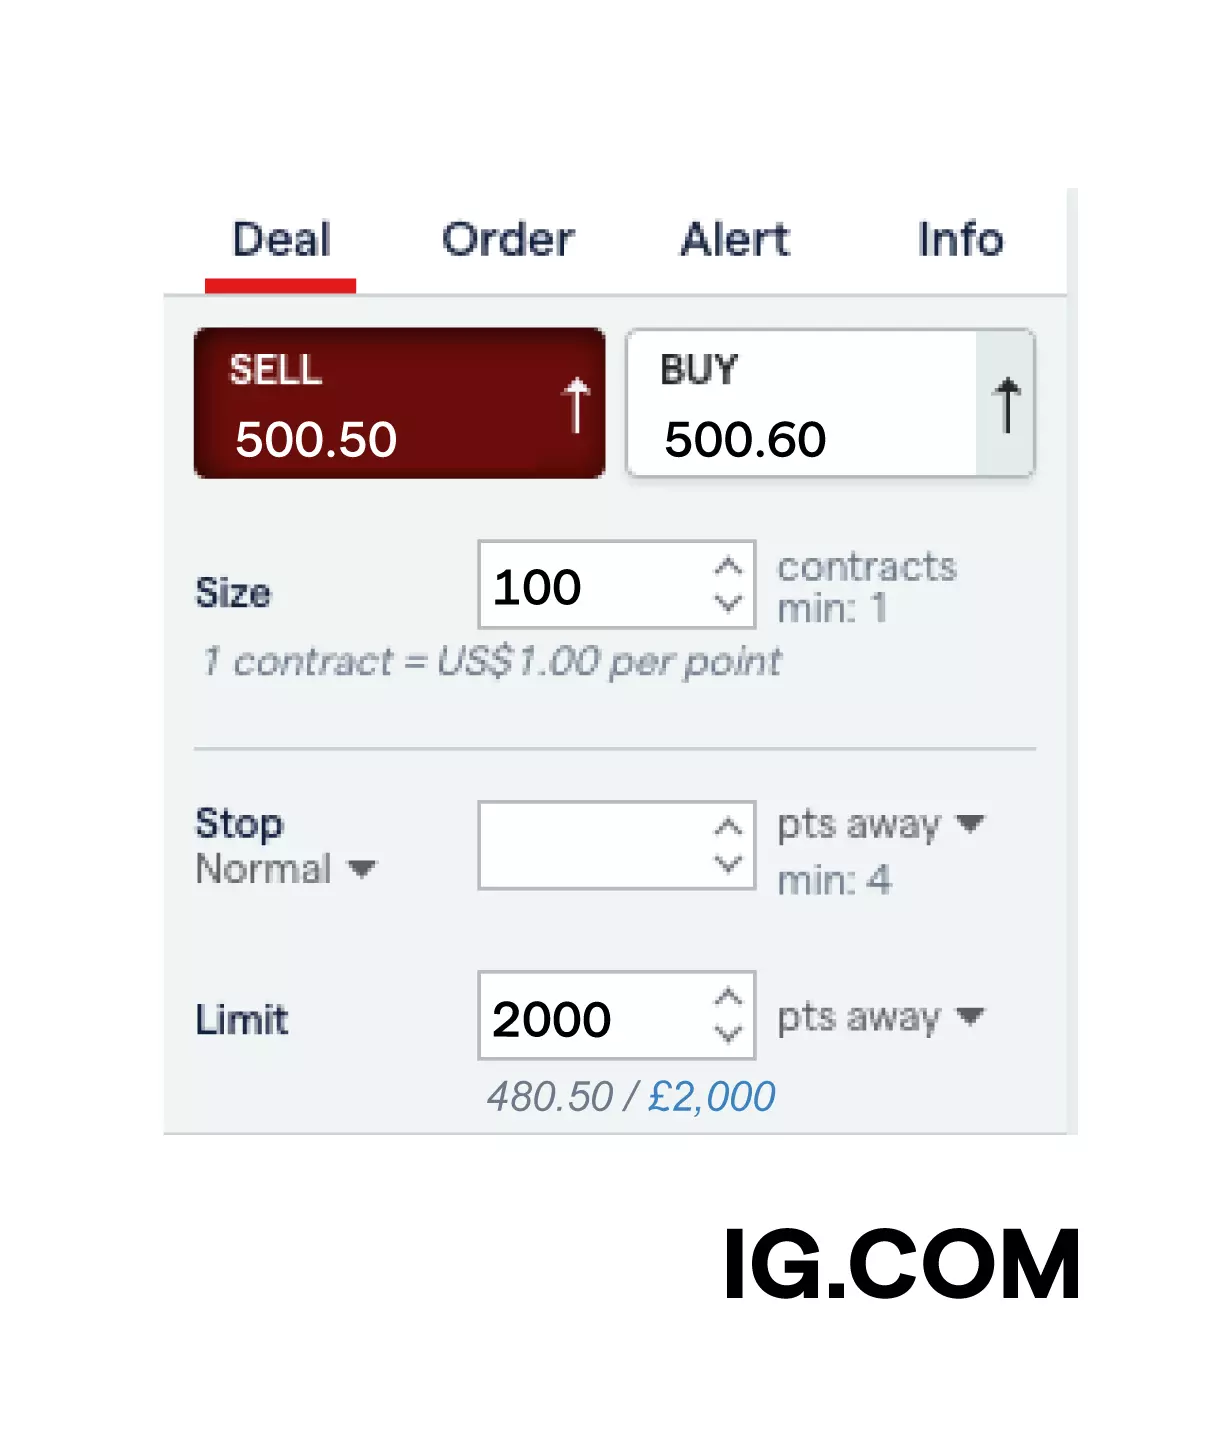 A deal ticket to sell a market at $100 per point, with a take-profit limit order set to close the trade when a $2000 profit has been made.